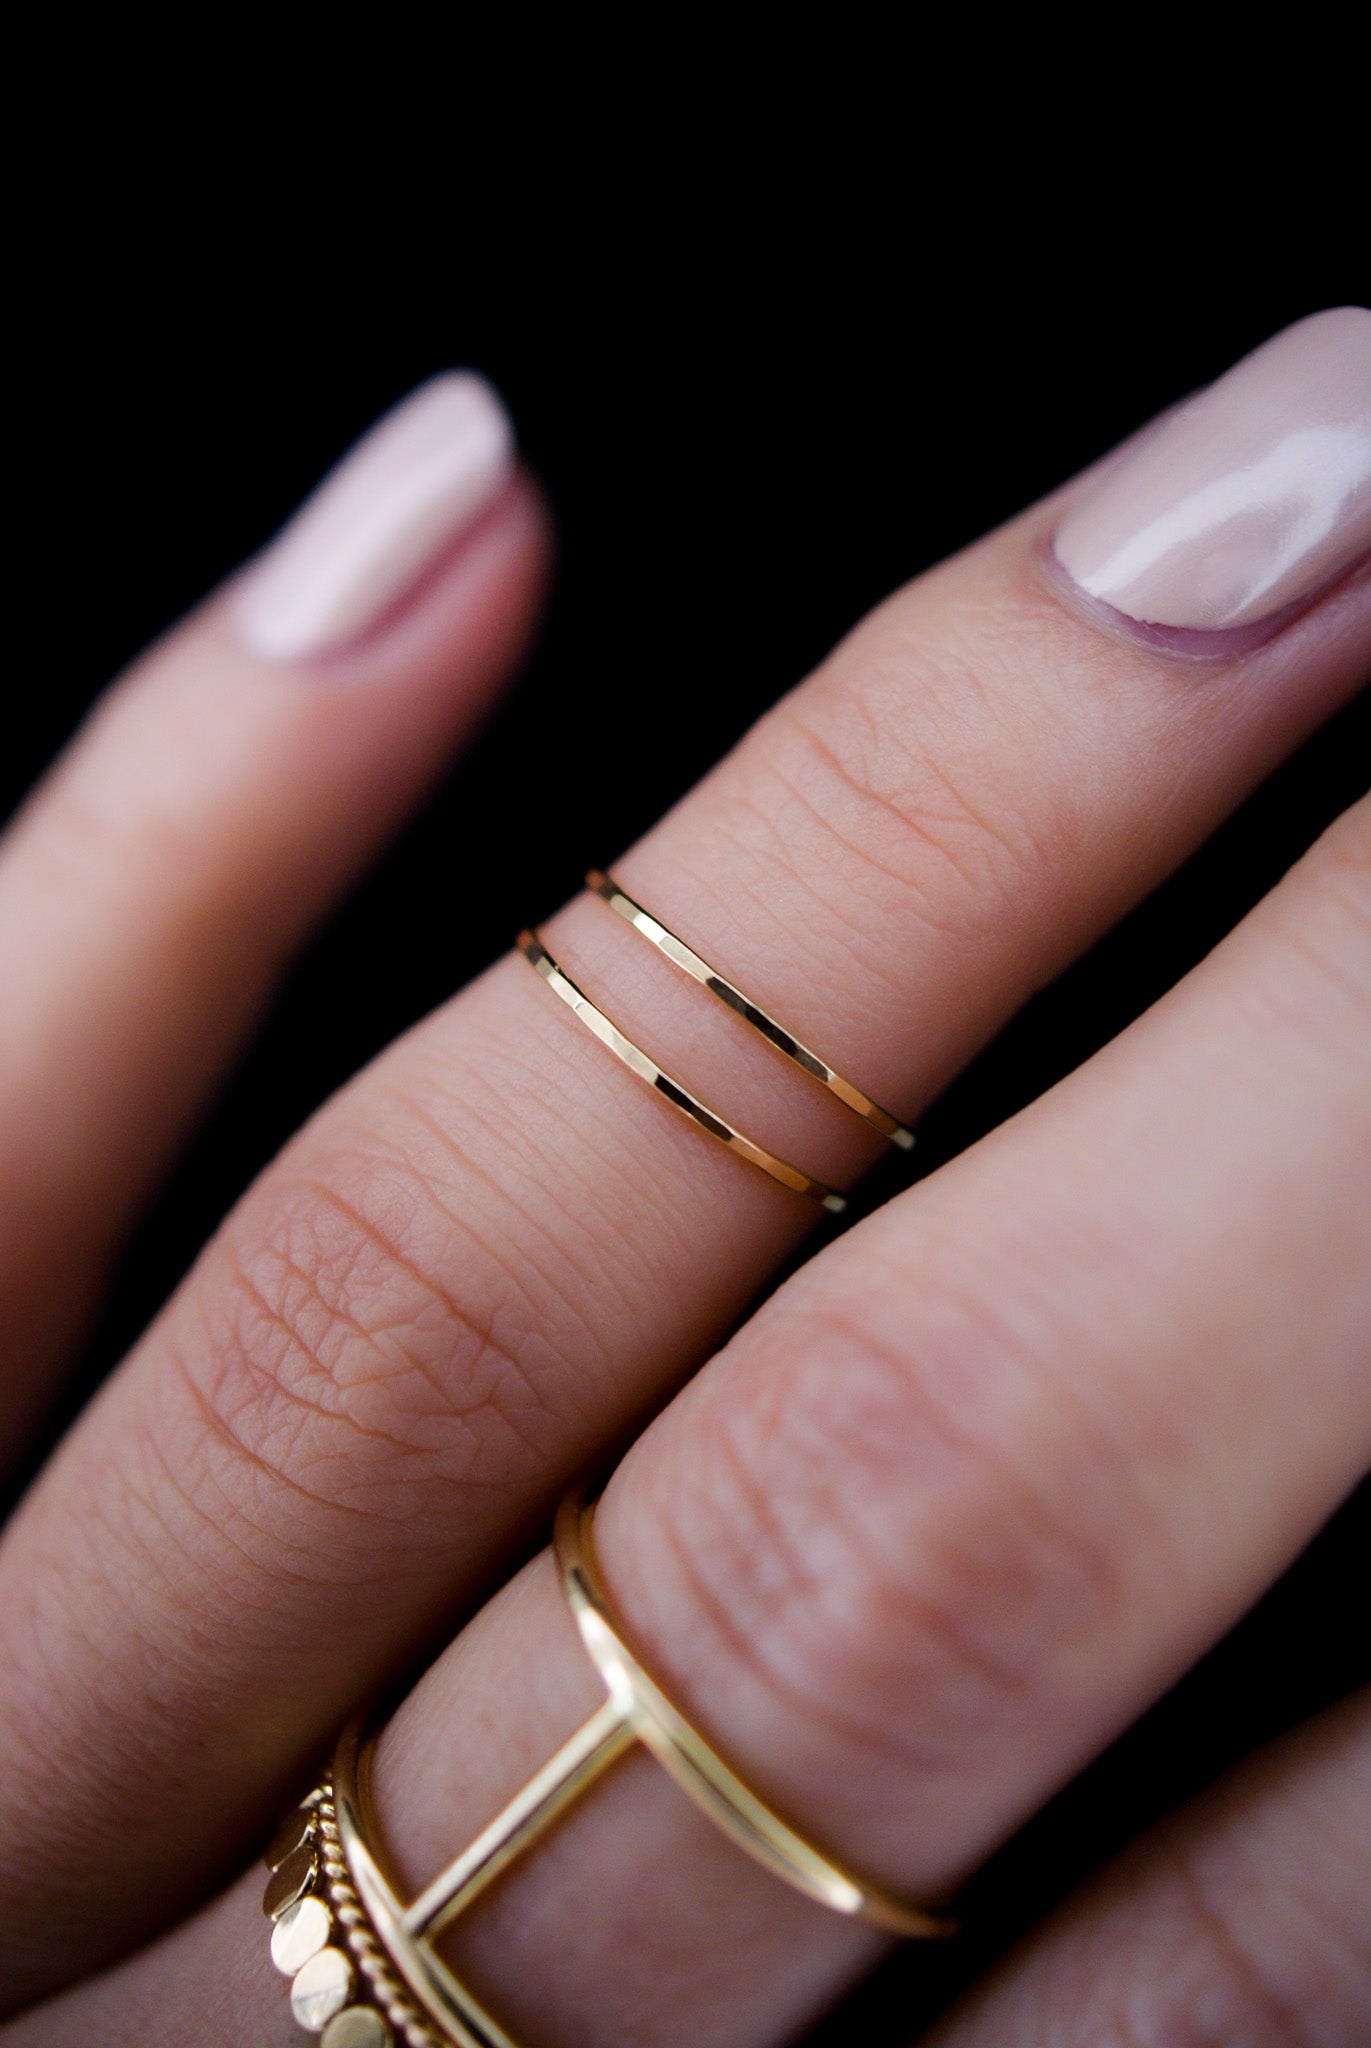 Amazon.com: YUBHEP 2PCS Gold Rings for Women 14k Gold Plated Stackable Thin  Rings for Women Rings Non Tarnish Rings Aesthetic Jewelry Size for 6-10:  Clothing, Shoes & Jewelry